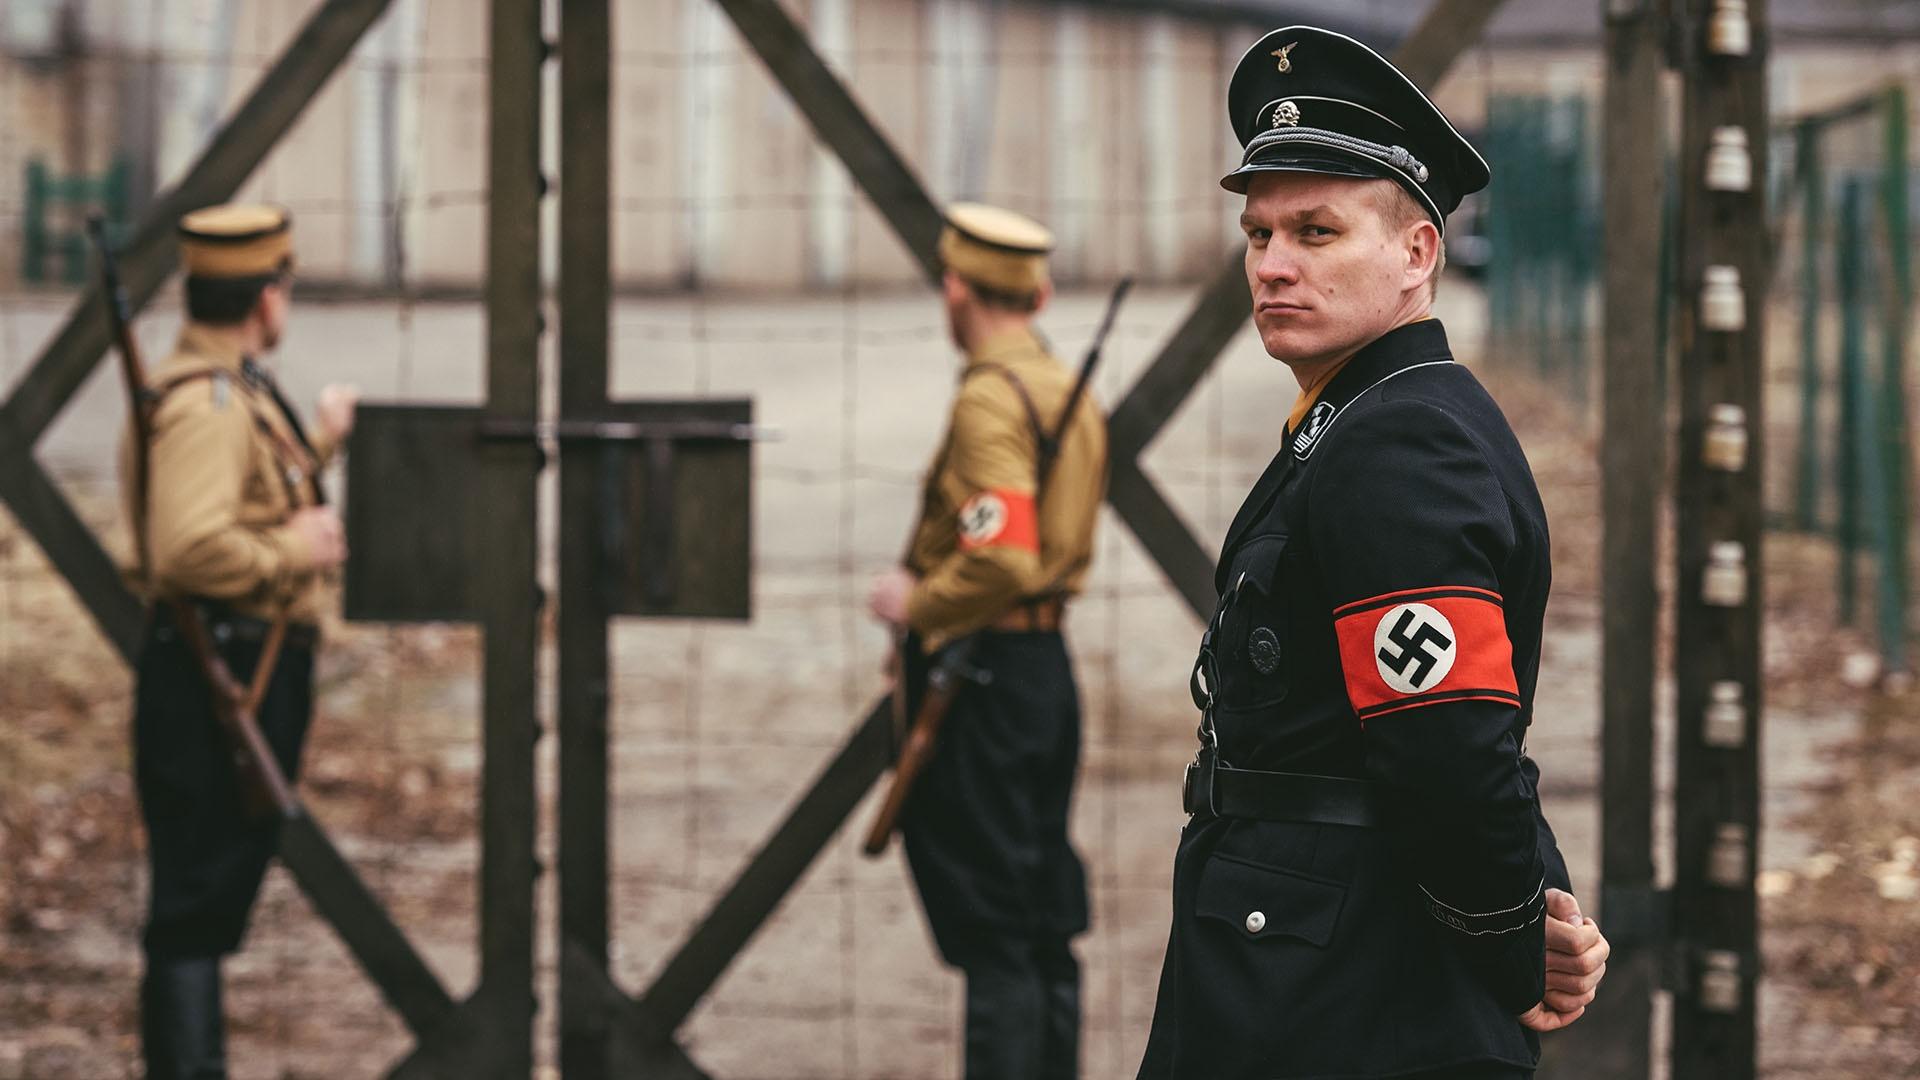 Rise of the Nazis | PBS